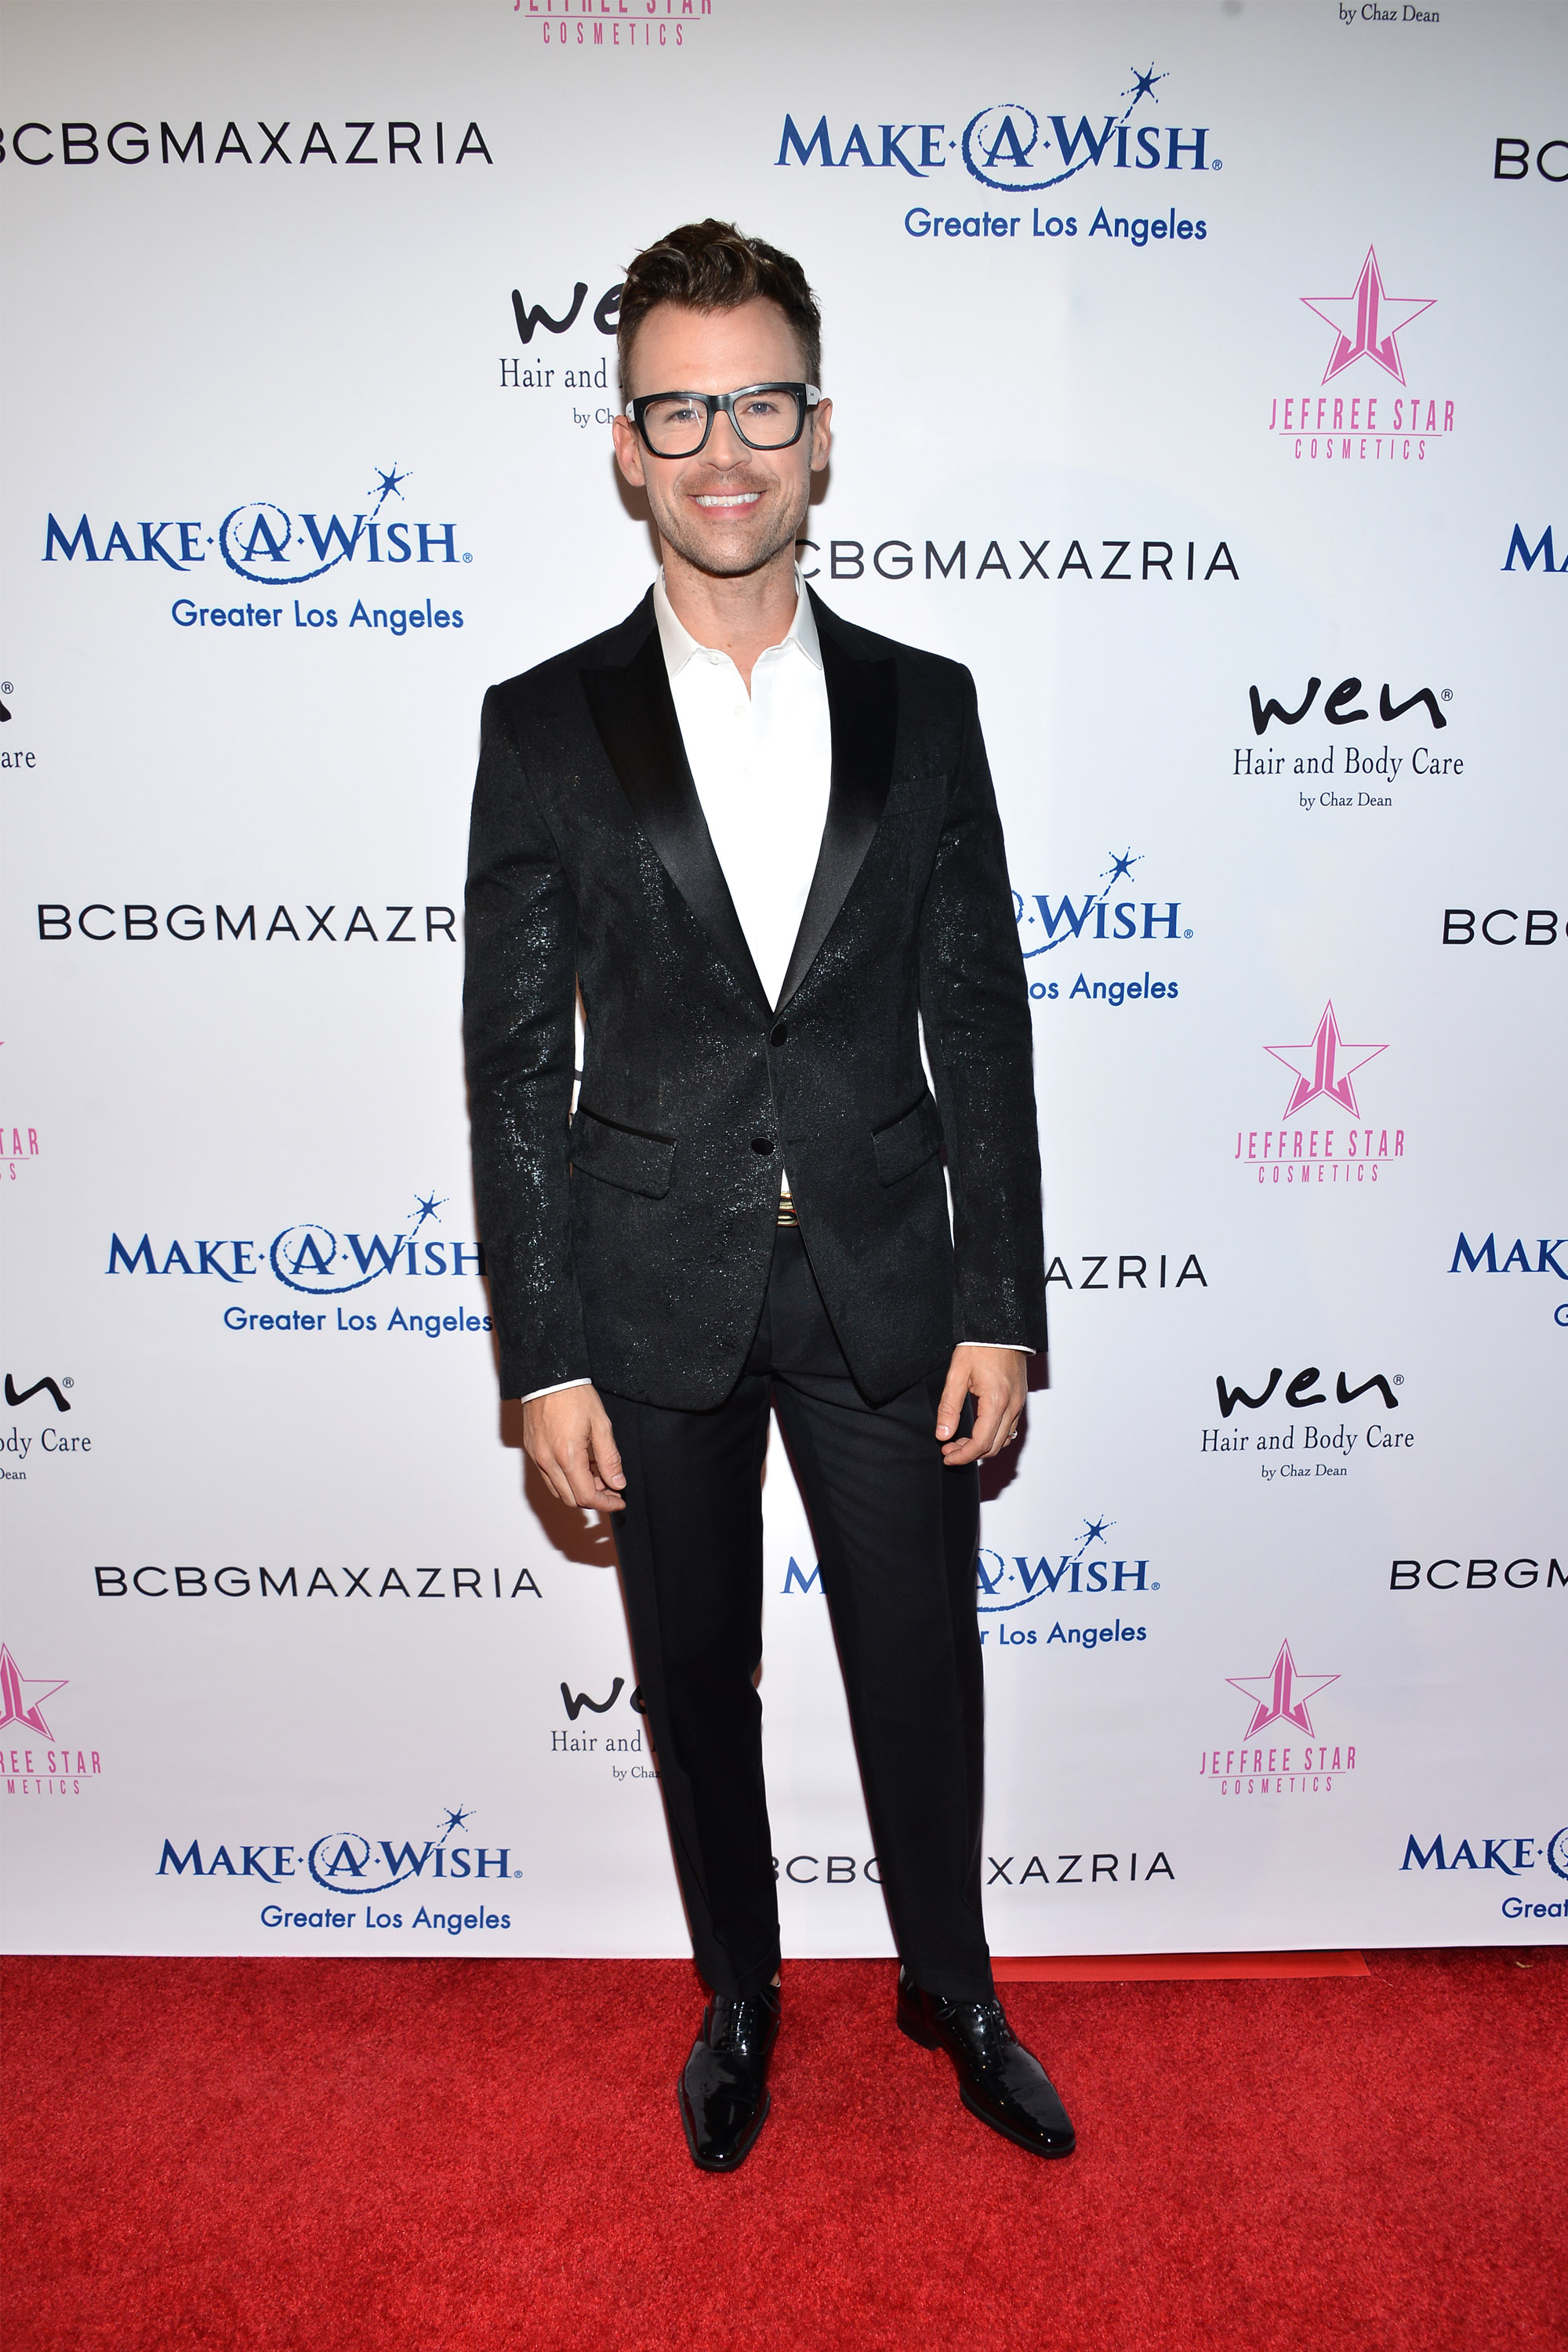 LOS ANGELES, CA - AUGUST 24: Brad Goreski attends the Inaugural Fashion Show Benefiting Make-A-Wish with BCBGMAXAZRIA and Celebrity Host Brad Goreski at The Taglyan Complex on August 24, 2016 in Los Angeles, California. (Photo by Araya Diaz/WireImage)